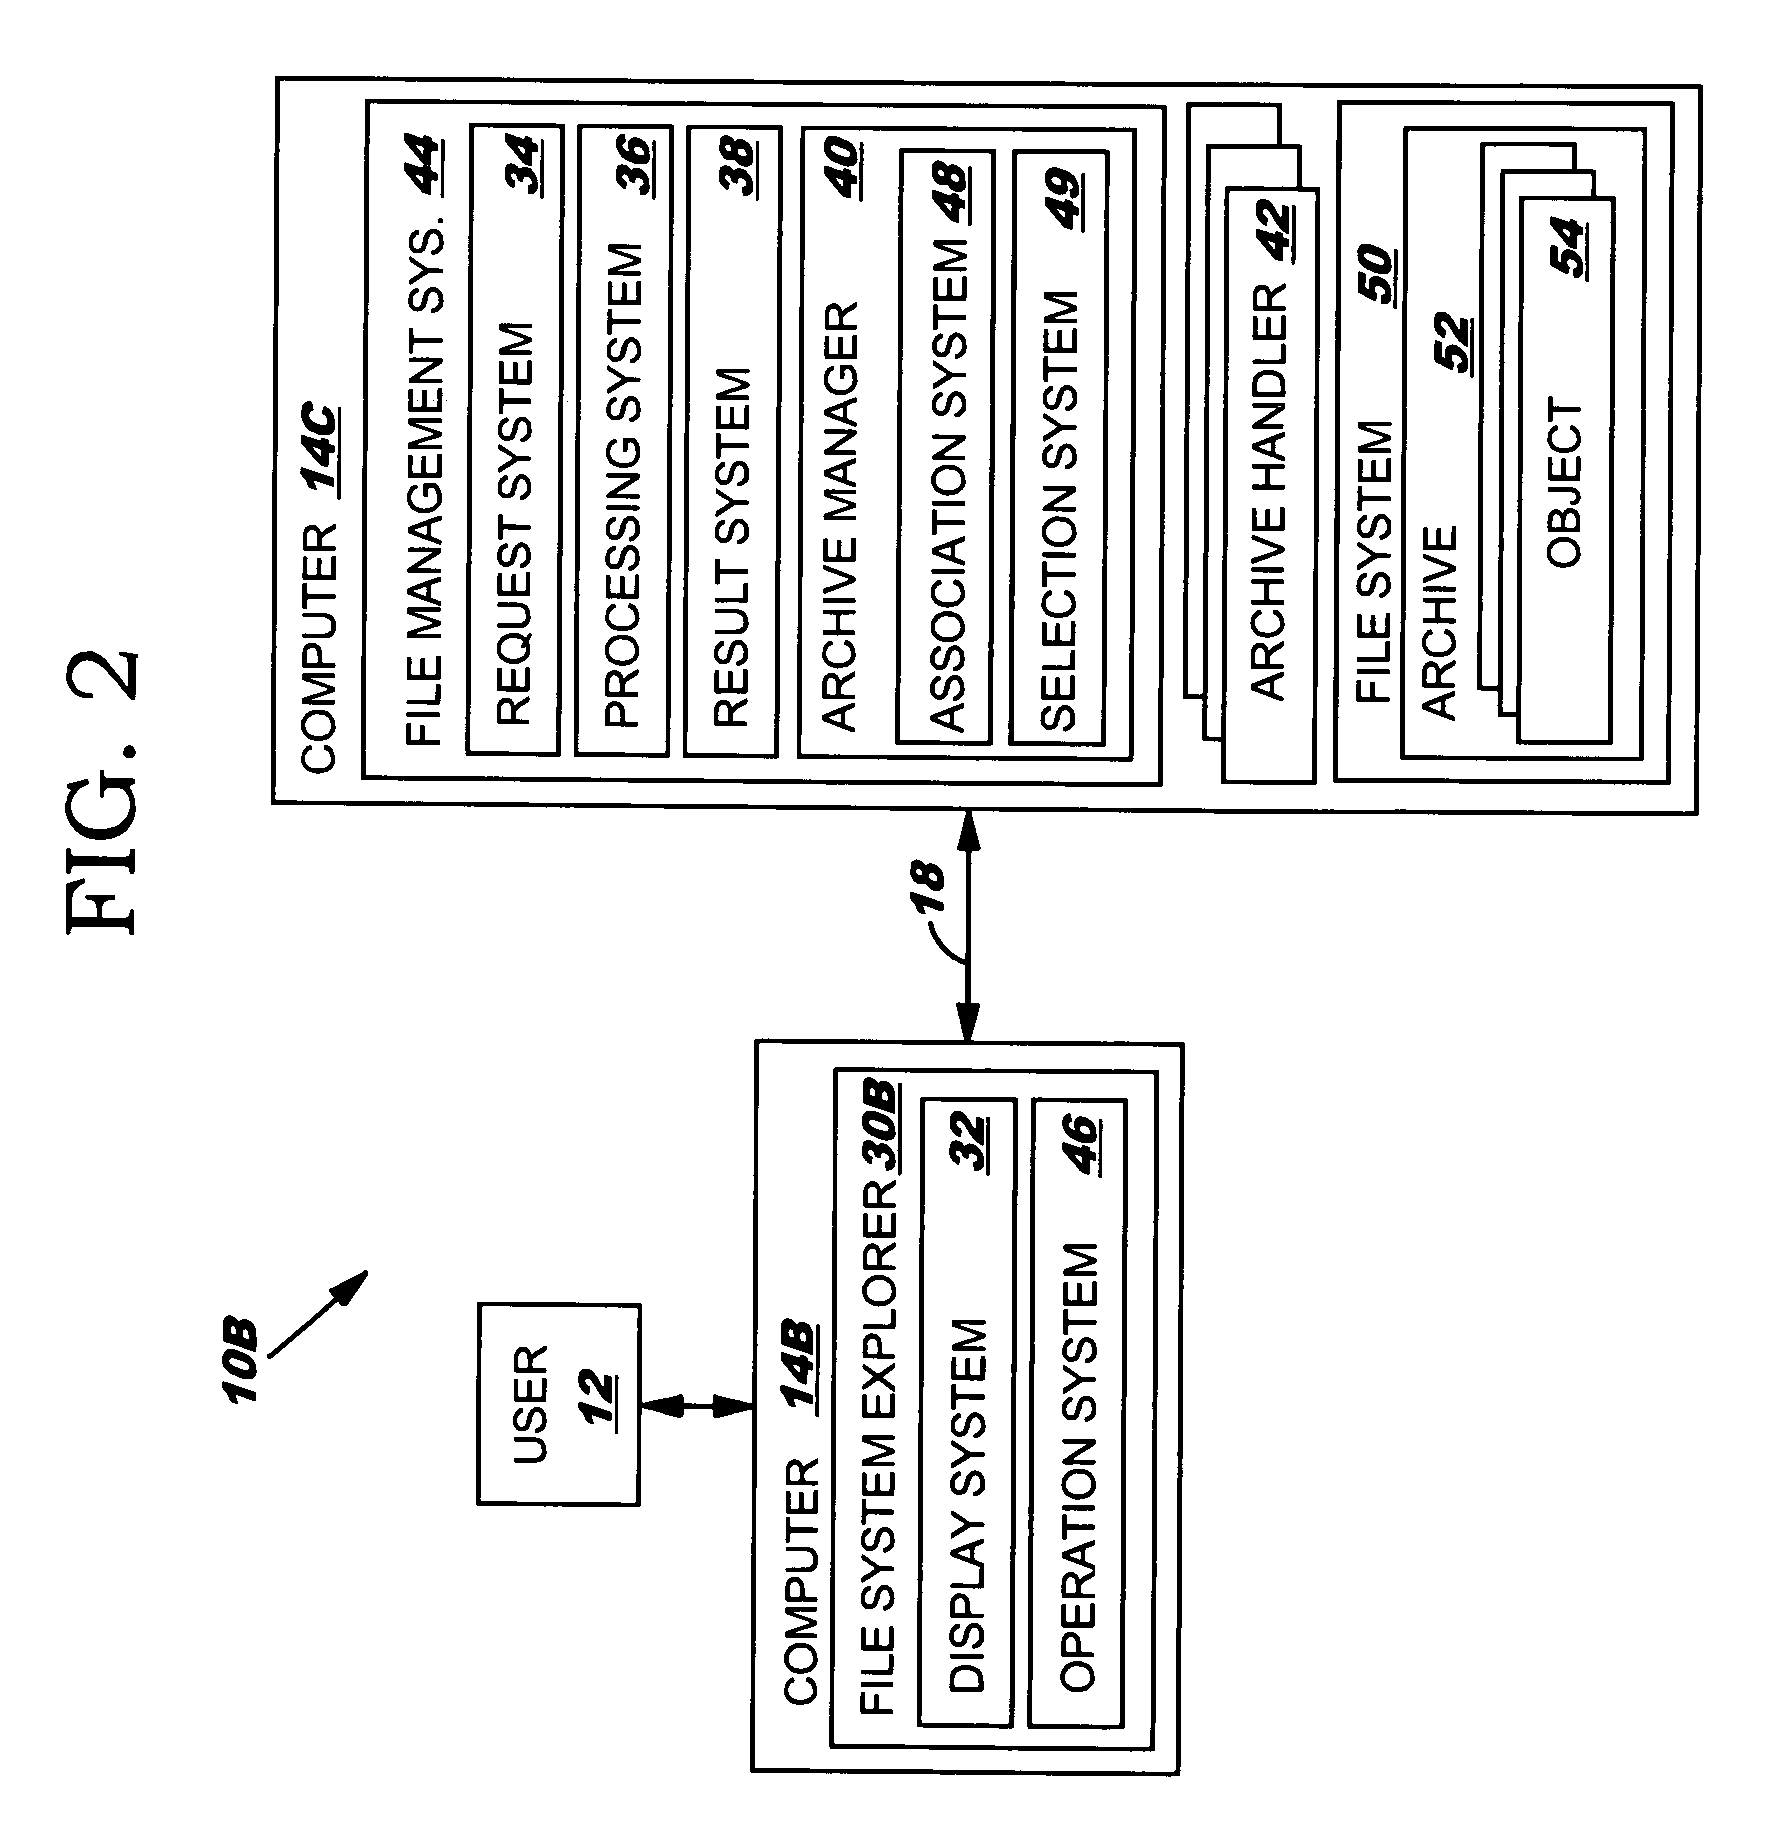 Method, system and program product for managing a file system that includes an archive